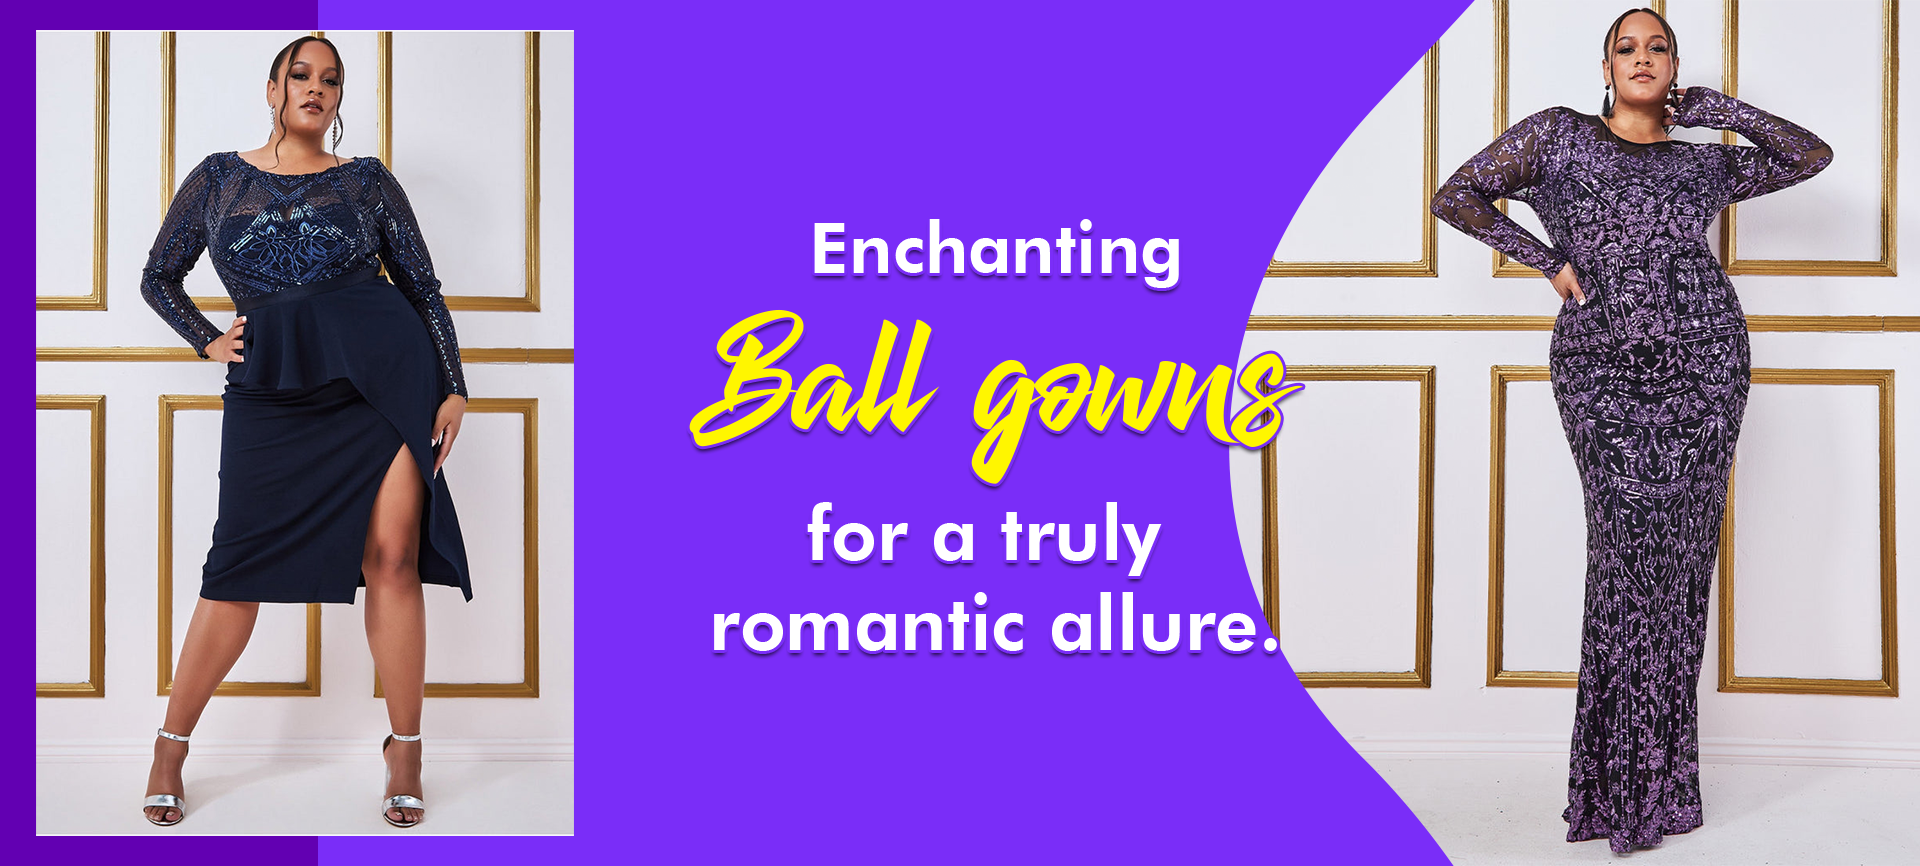 Enchanting ball gowns for a truly romantic allure.